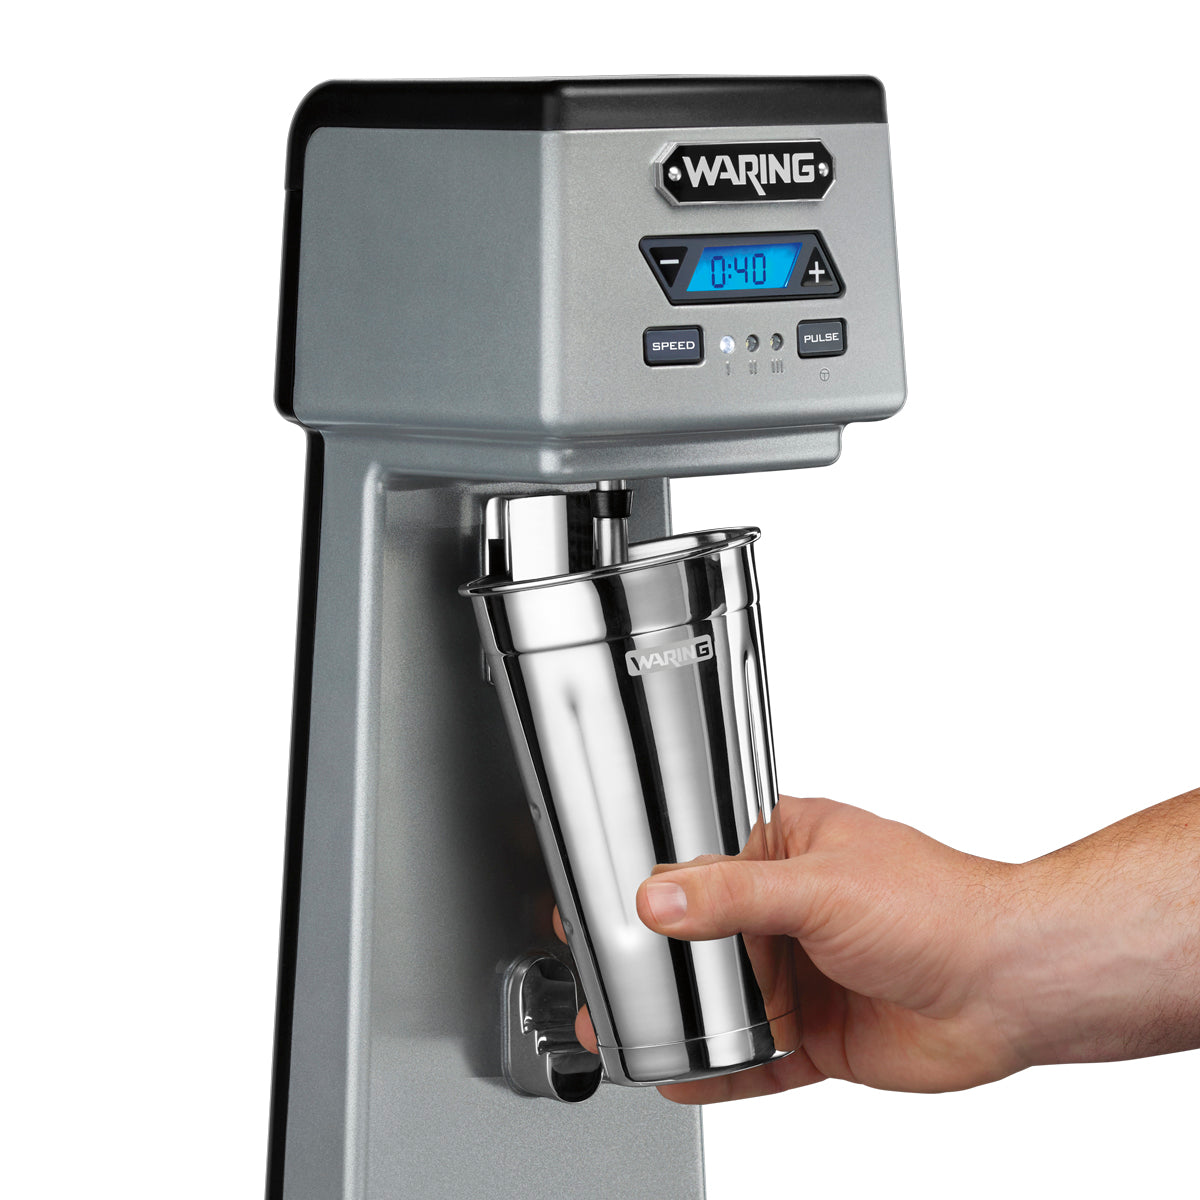 WDM120TX Heavy-Duty Single-Spindle Drink Mixer with Timer & Hands Free Operation by Waring Commercial